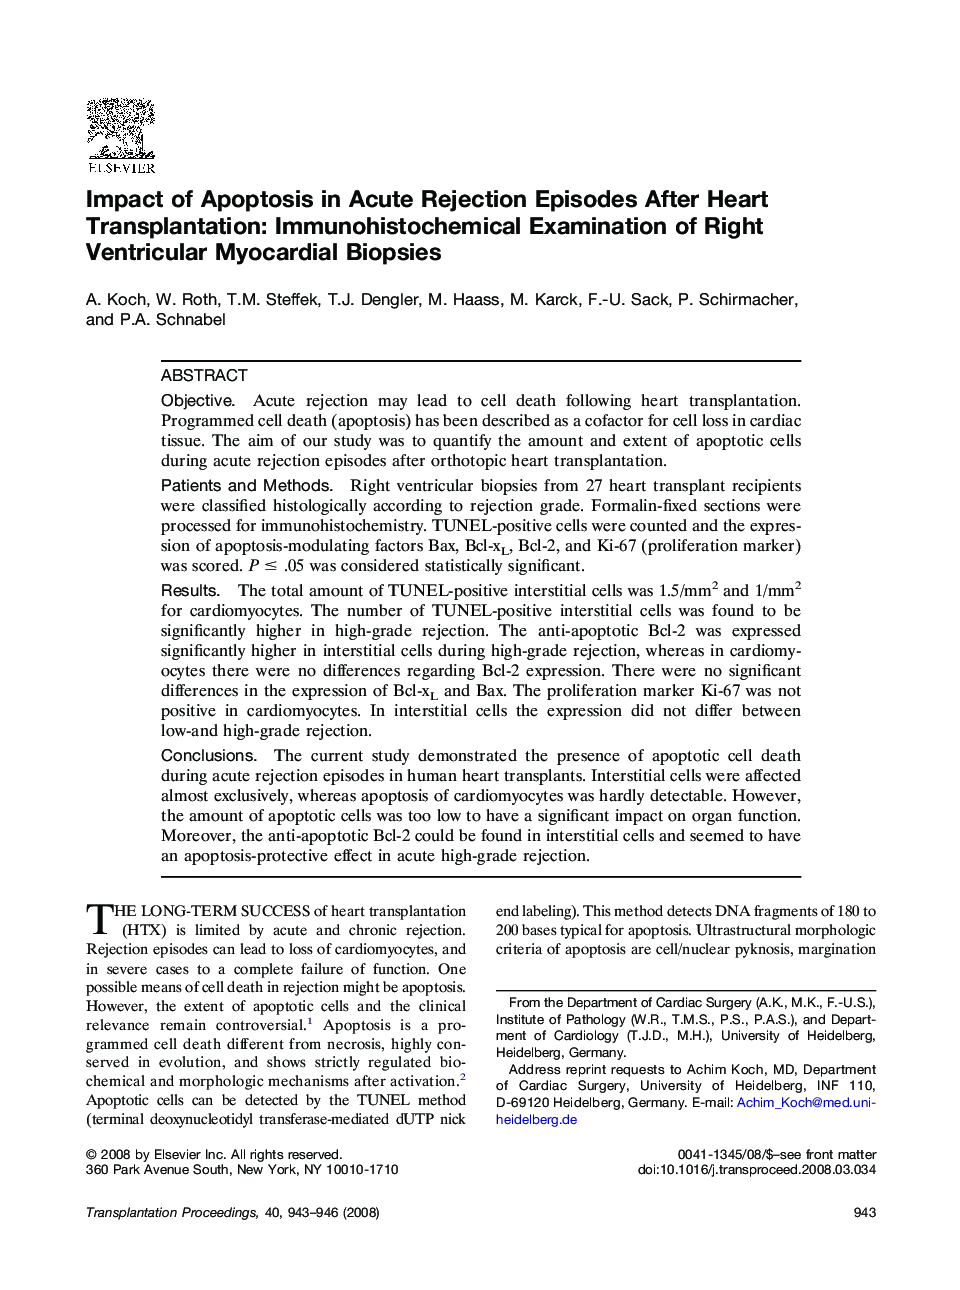 Impact of Apoptosis in Acute Rejection Episodes After Heart Transplantation: Immunohistochemical Examination of Right Ventricular Myocardial Biopsies